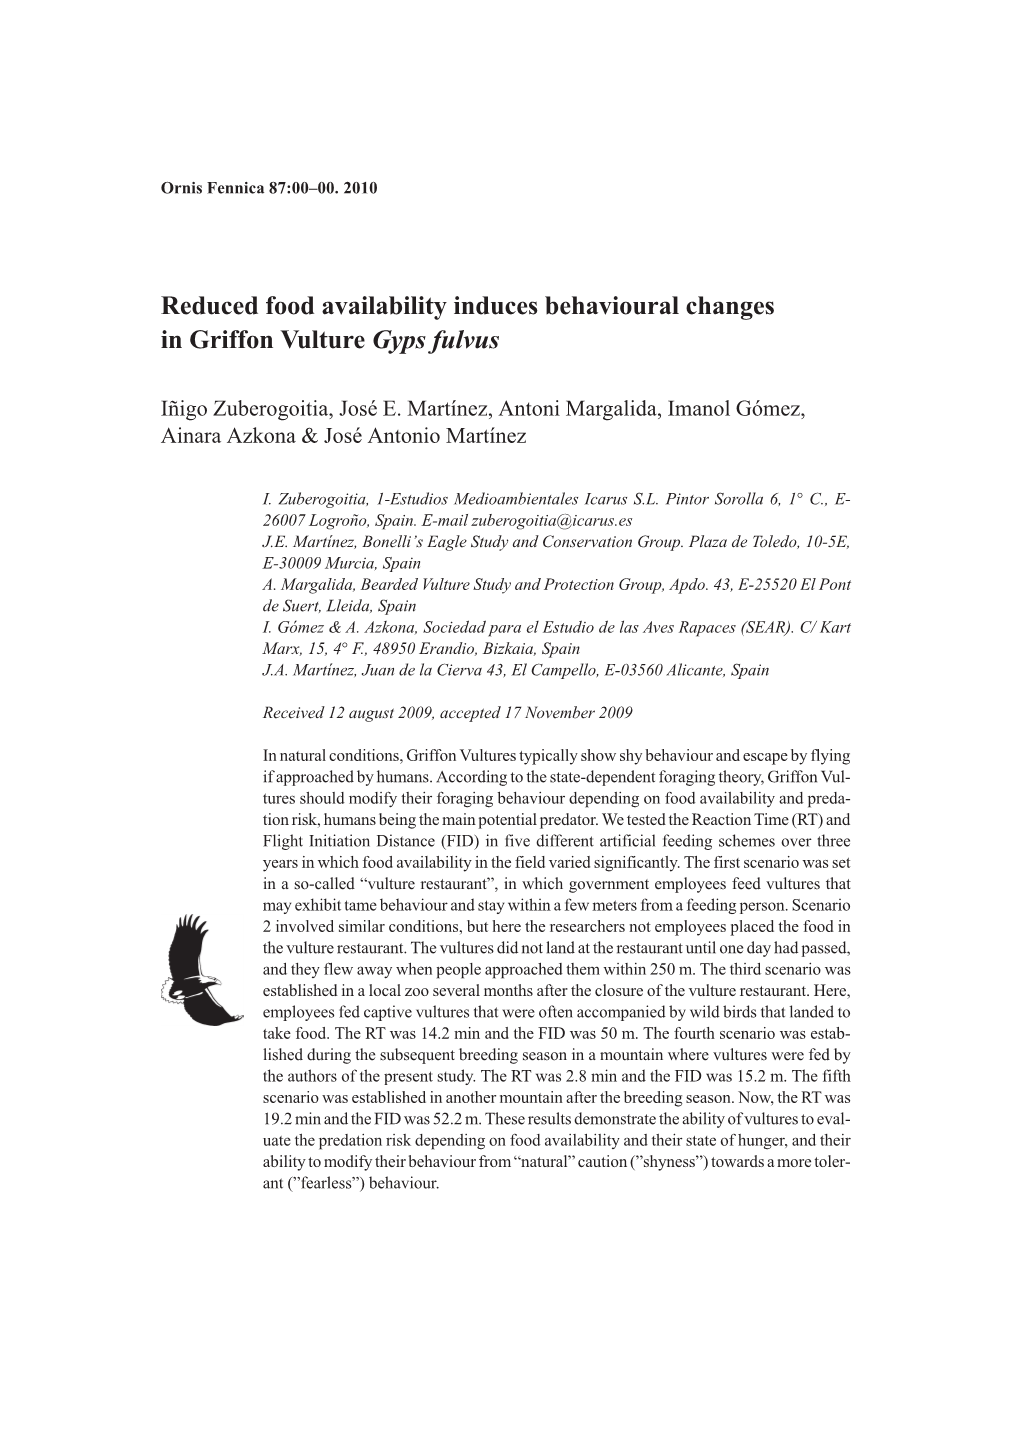 Reduced Food Availability Induces Behavioural Changes in Griffon Vulture Gyps Fulvus